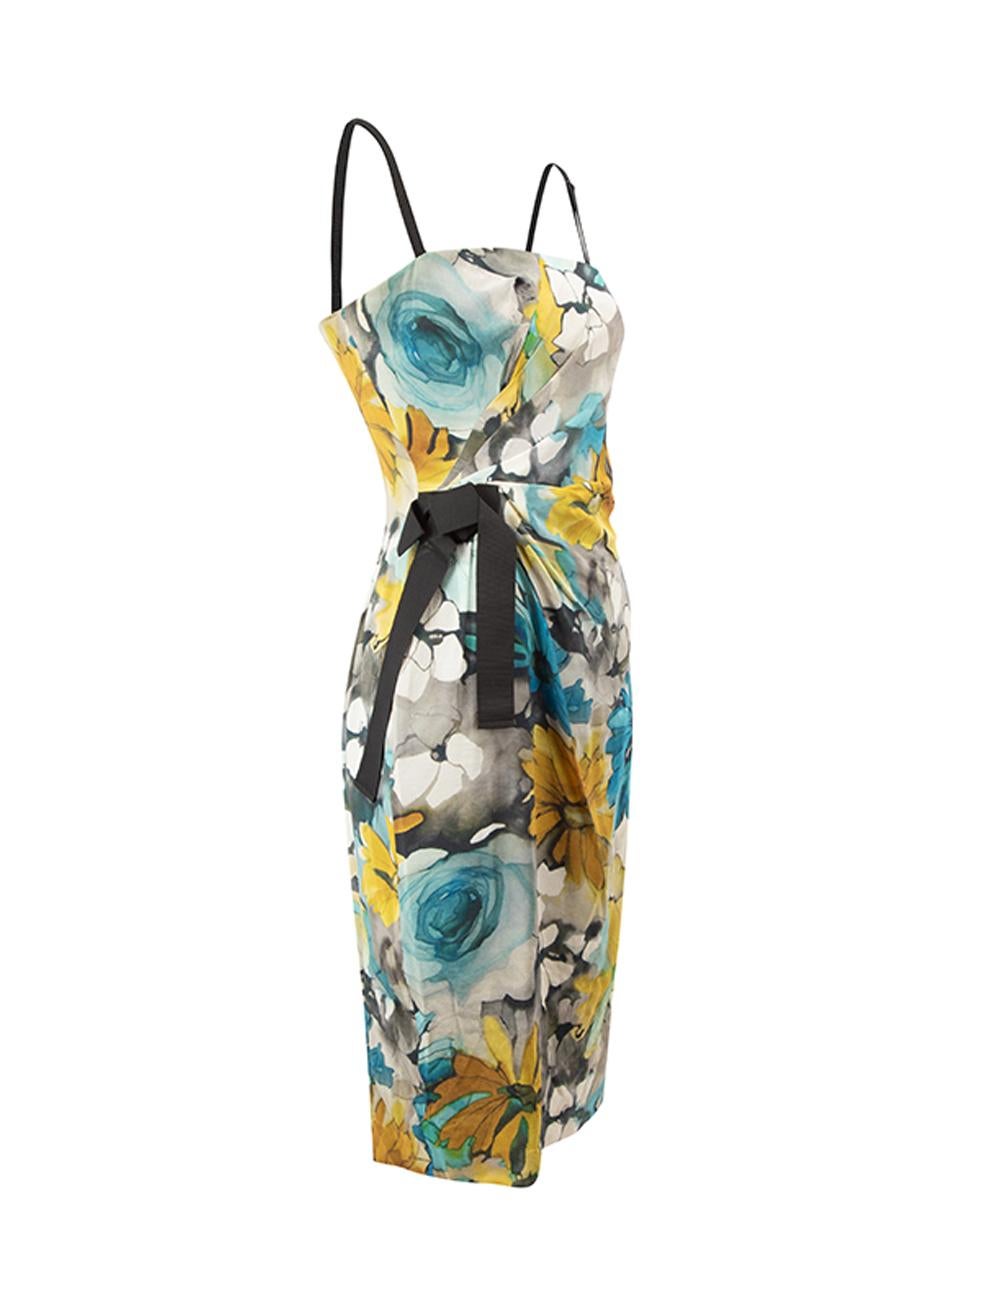 CONDITION is Very good. Minimal wear to dress is evident. Minimal wear to the weave of the silk of dress where slight pulls can be found on this used D&G designer resale item.
 
 Details
  Multicolour
 Silk
 Mini dress
 Floral print pattern
